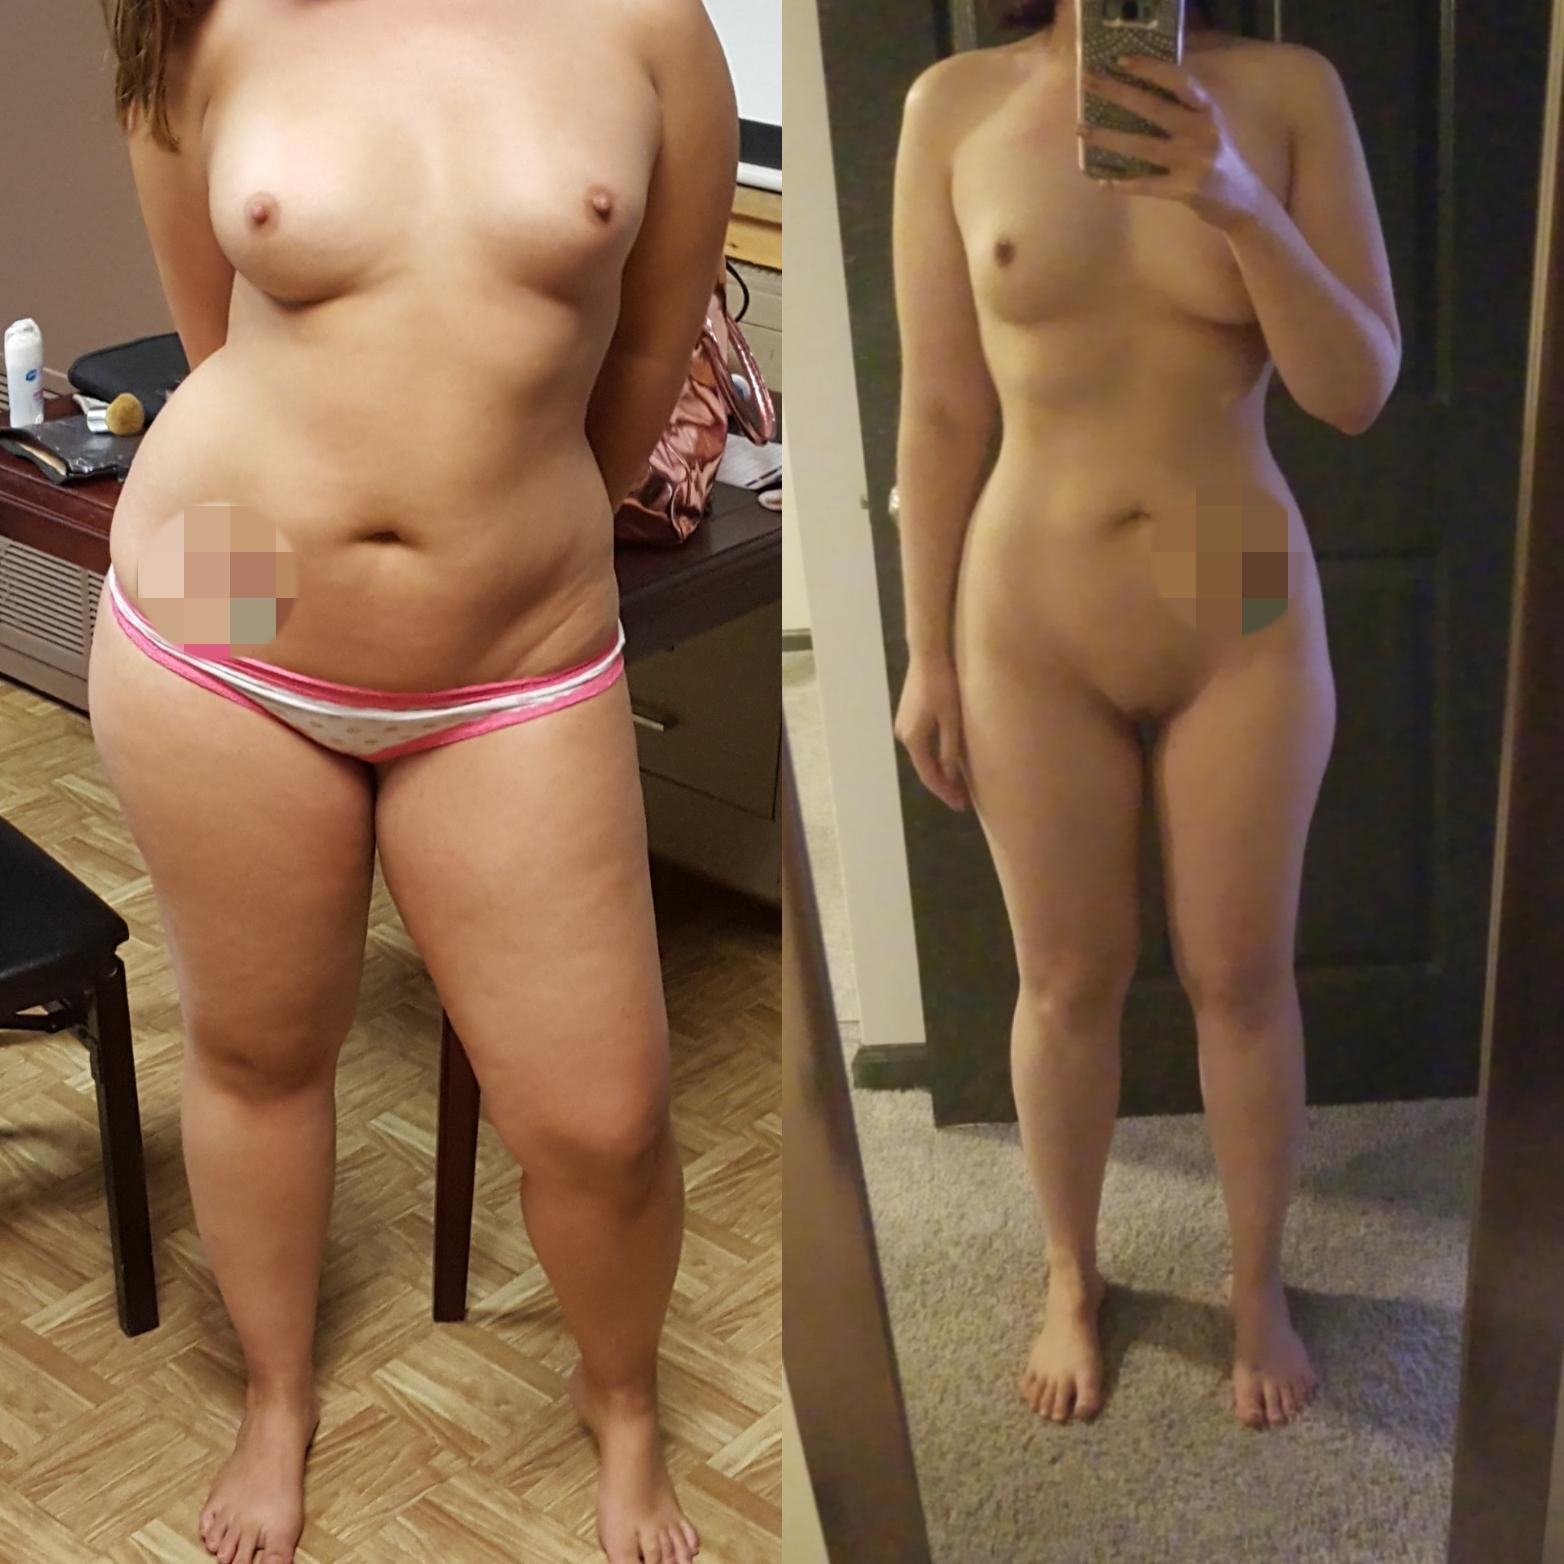 30/F/195 to 141 in 20 months!